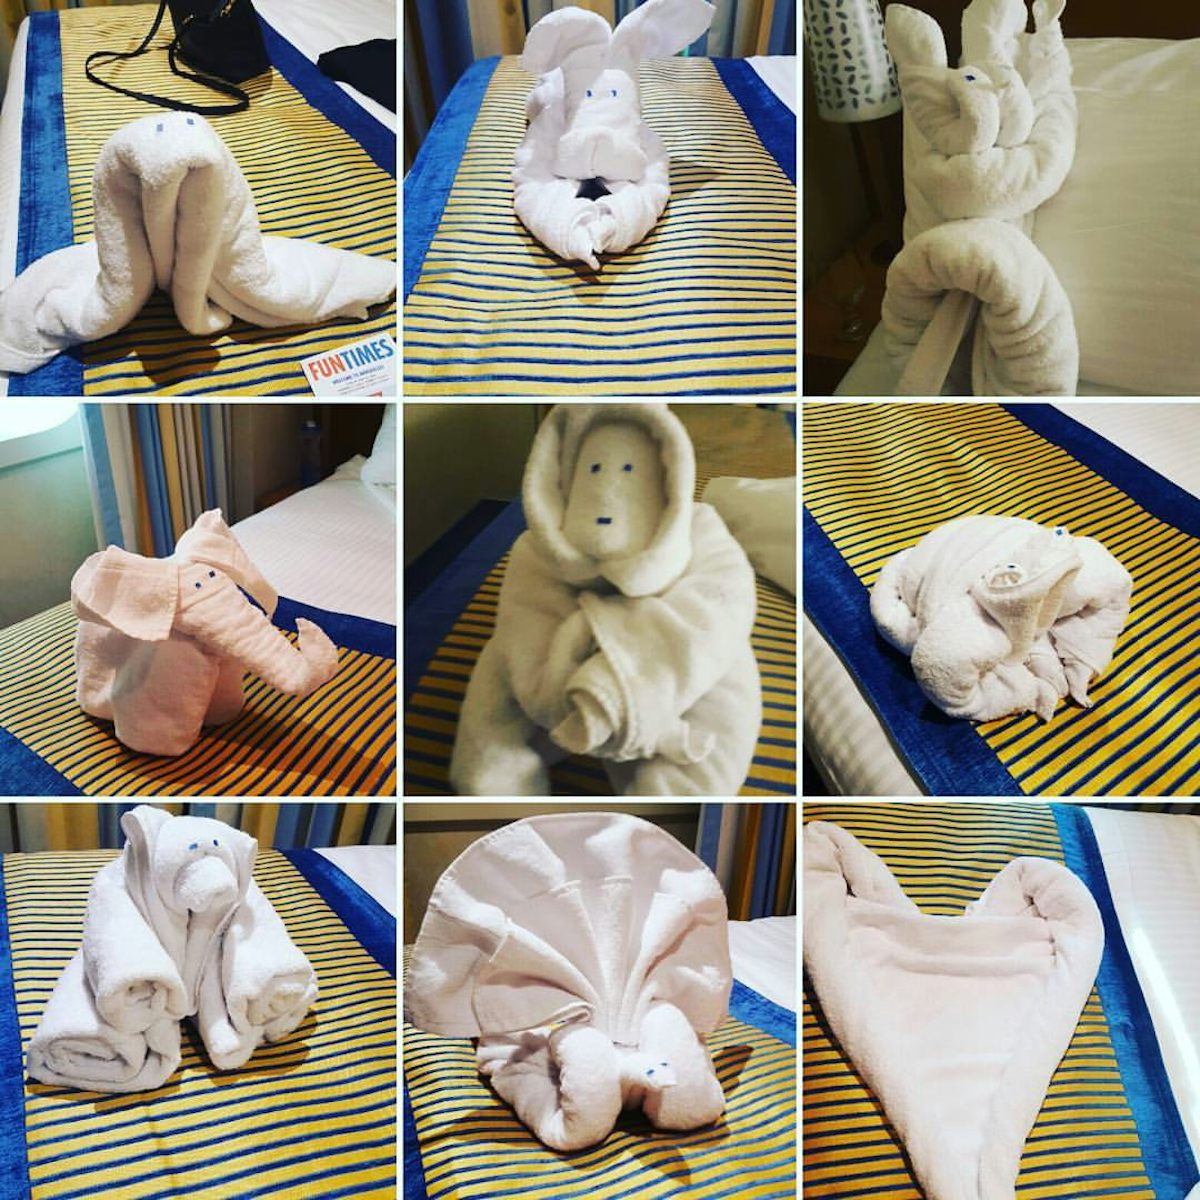 Towel animals in the cabin